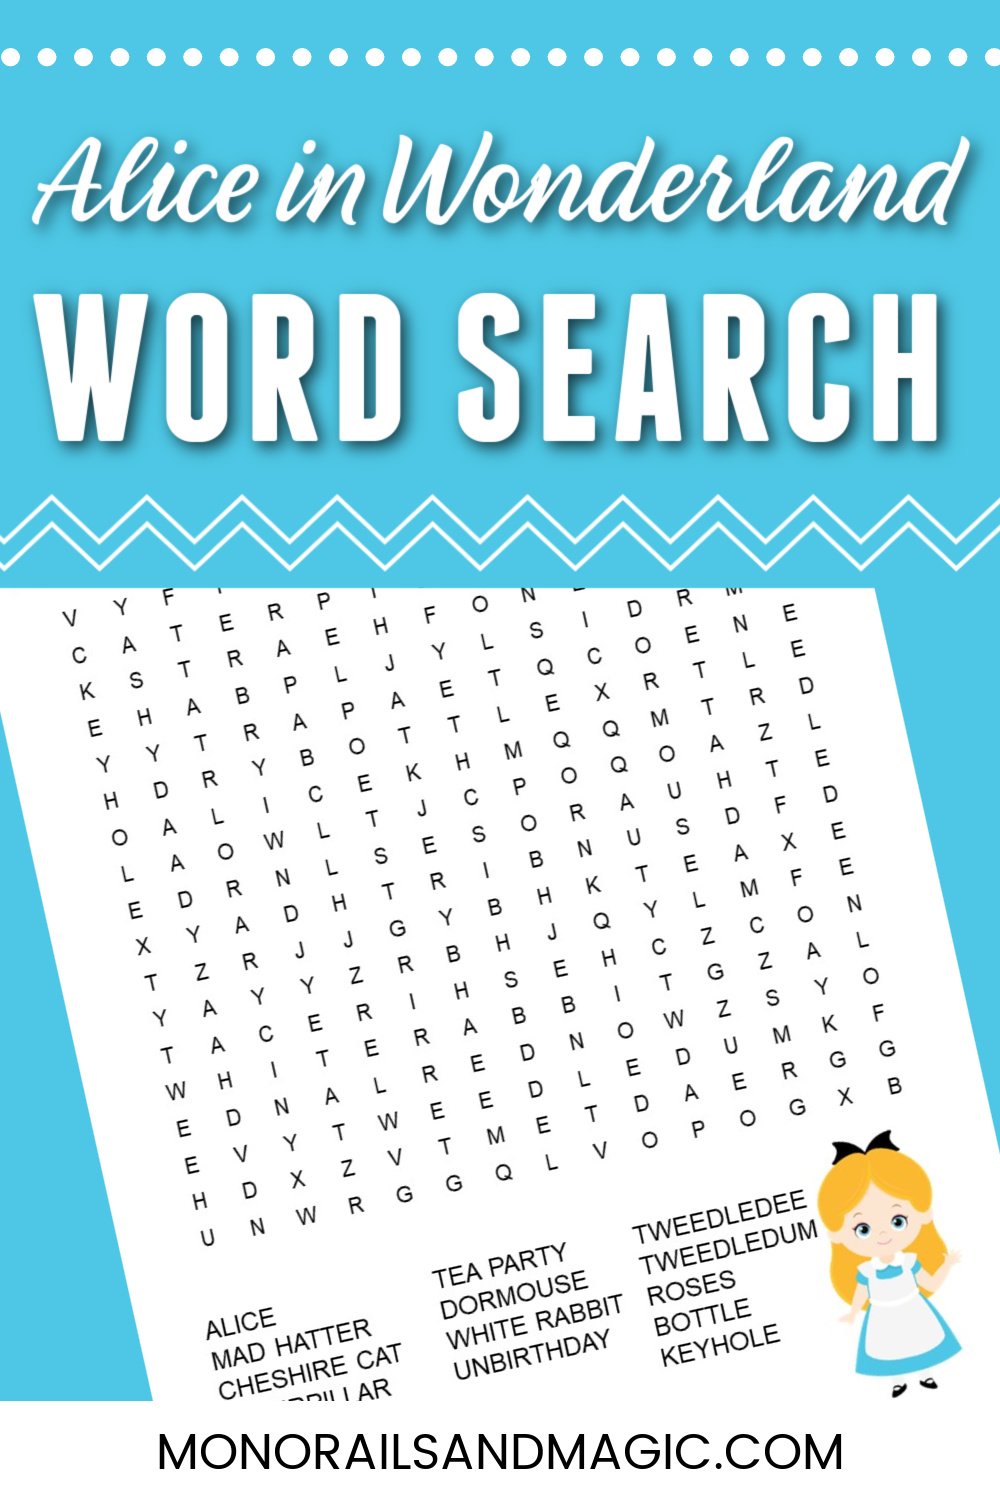 Free printable Alice in Wonderland word search for kids.